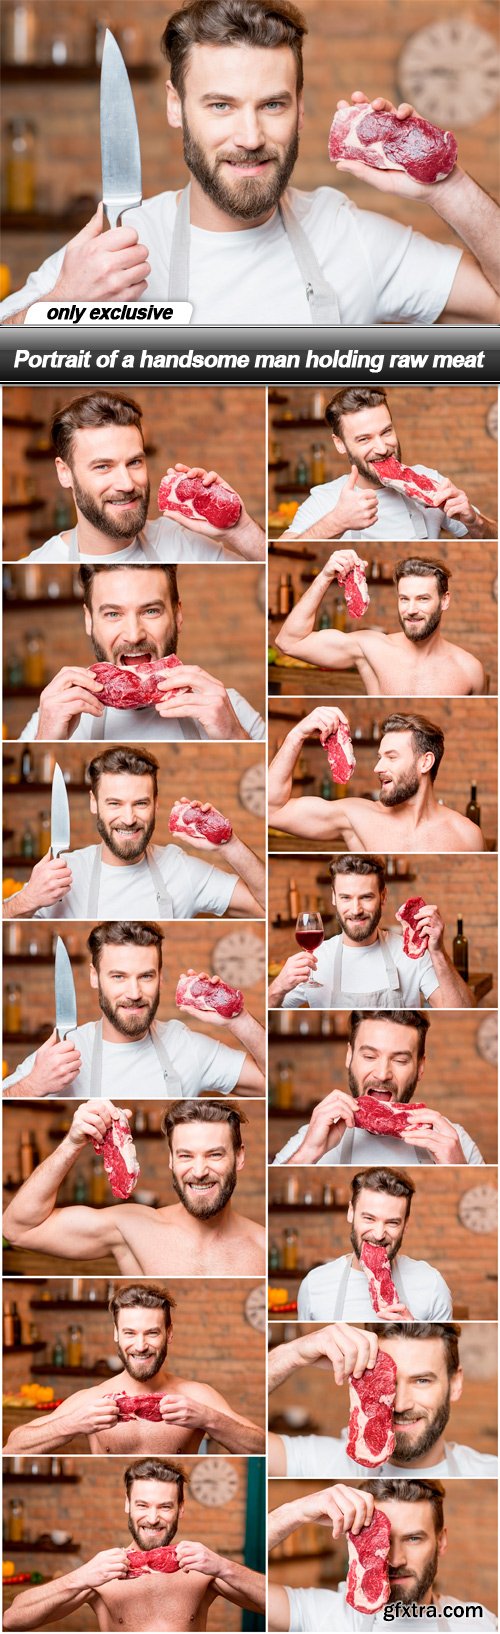 Portrait of a handsome man holding raw meat - 15 UHQ JPEG